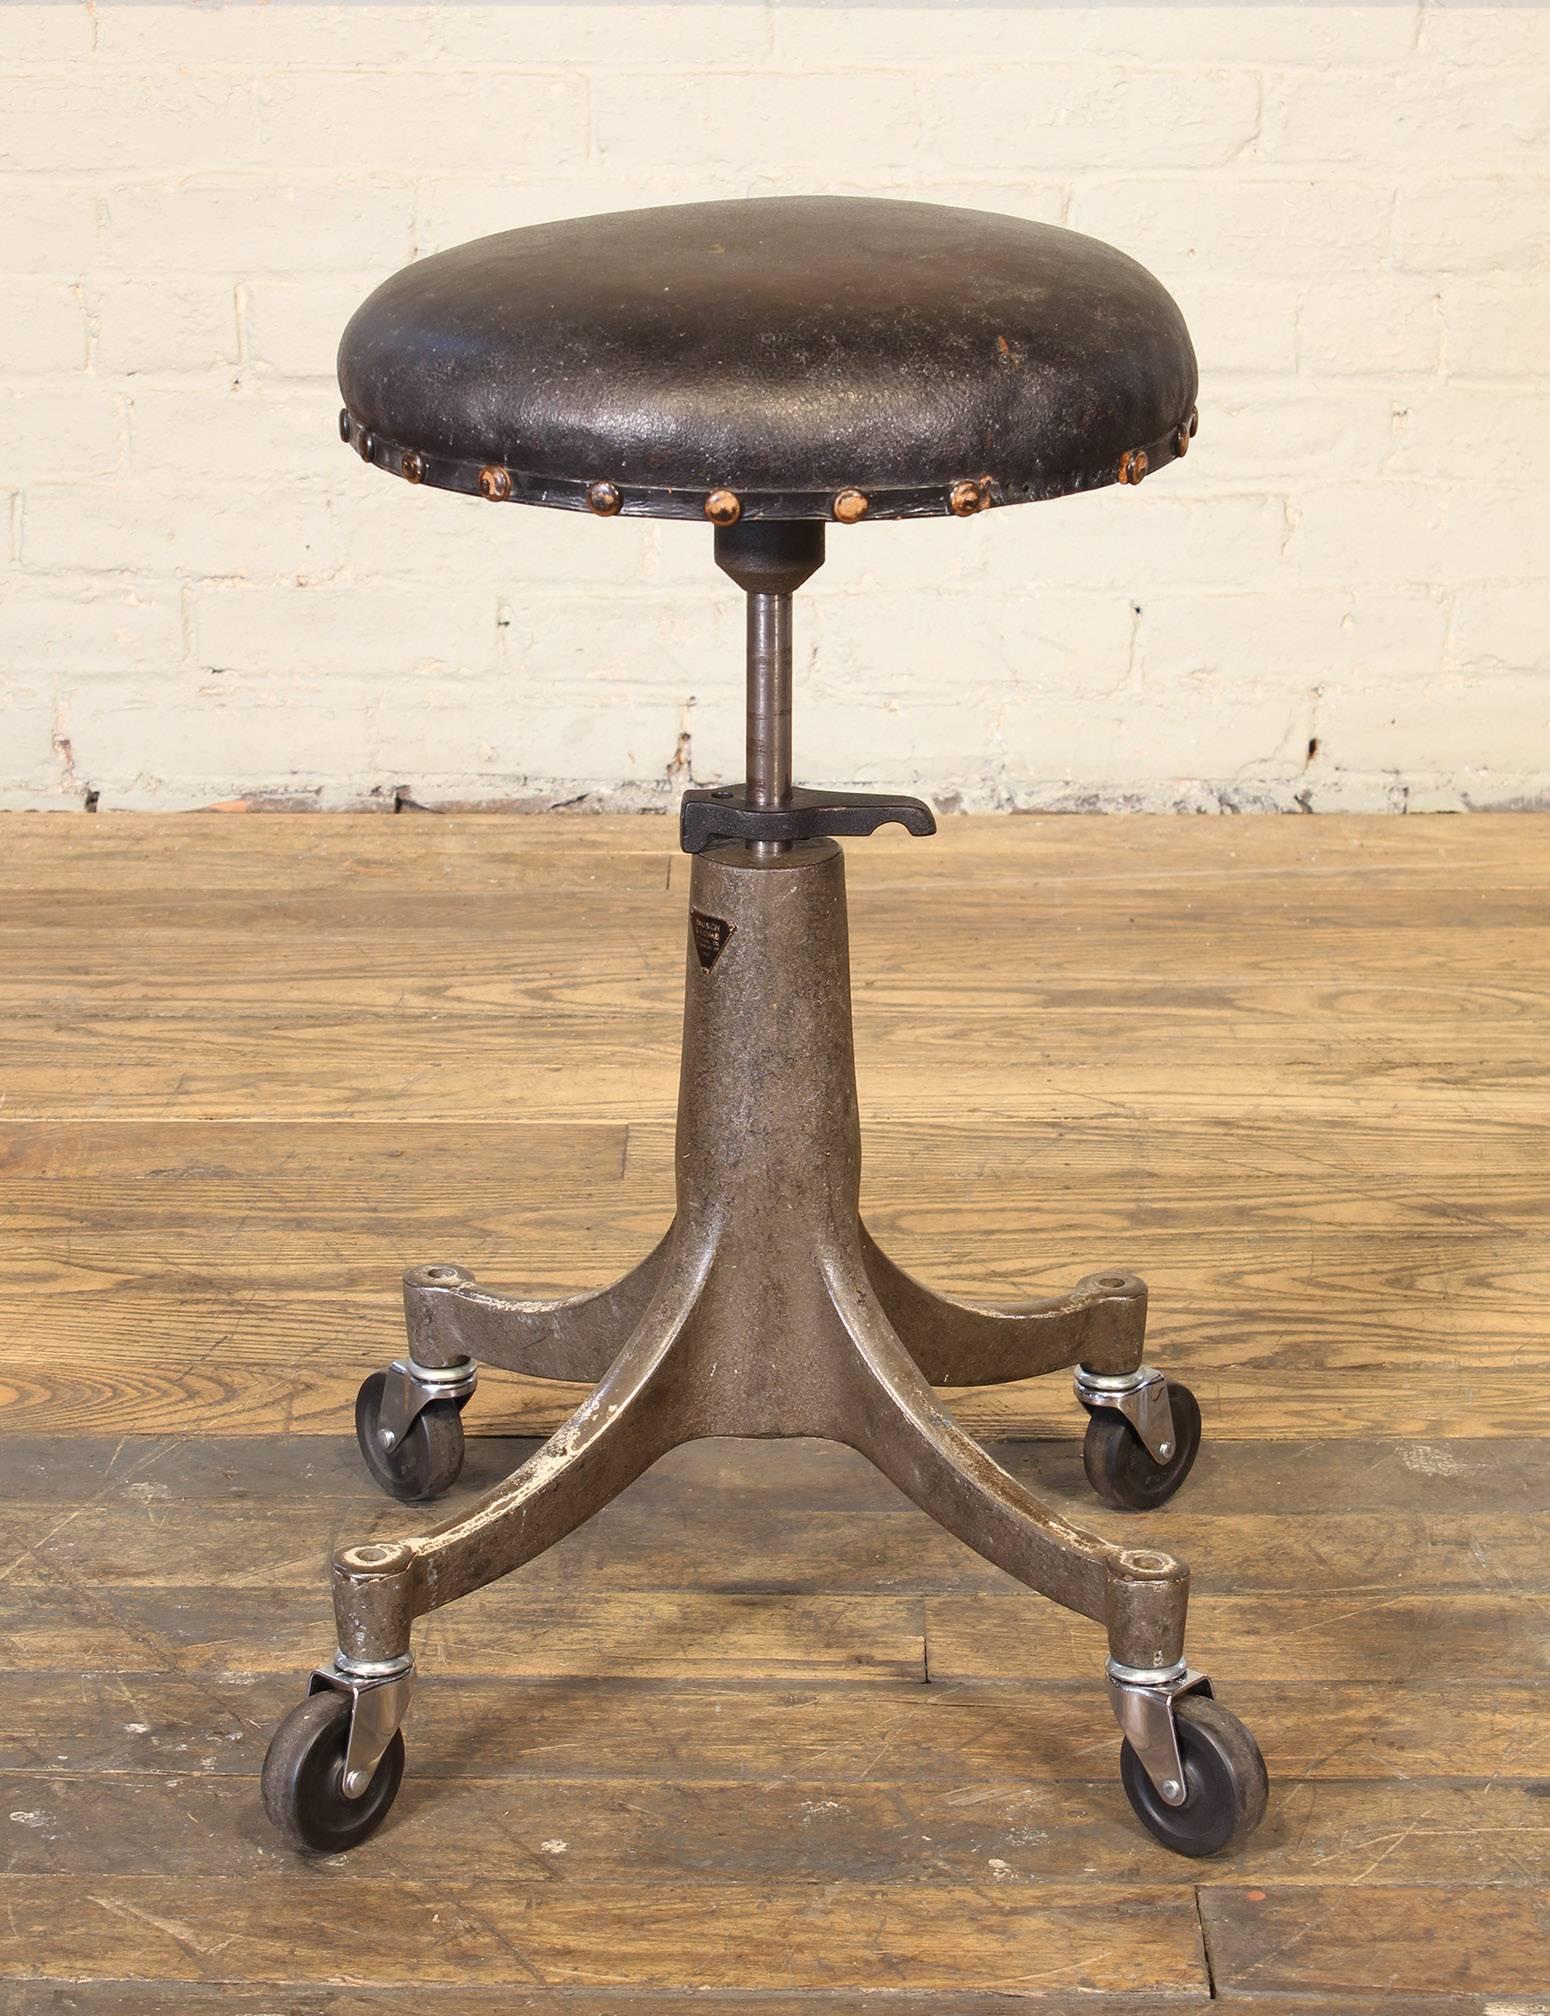 Vintage authentic Bausch & Lomb medical eye doctor's / opticians / optometrists stool. Features four swivel castors, height adjustment lever, brass tacks, rubber wheels, worn leather seat, painted cast iron base and Bausch & Lomb badge. Reads